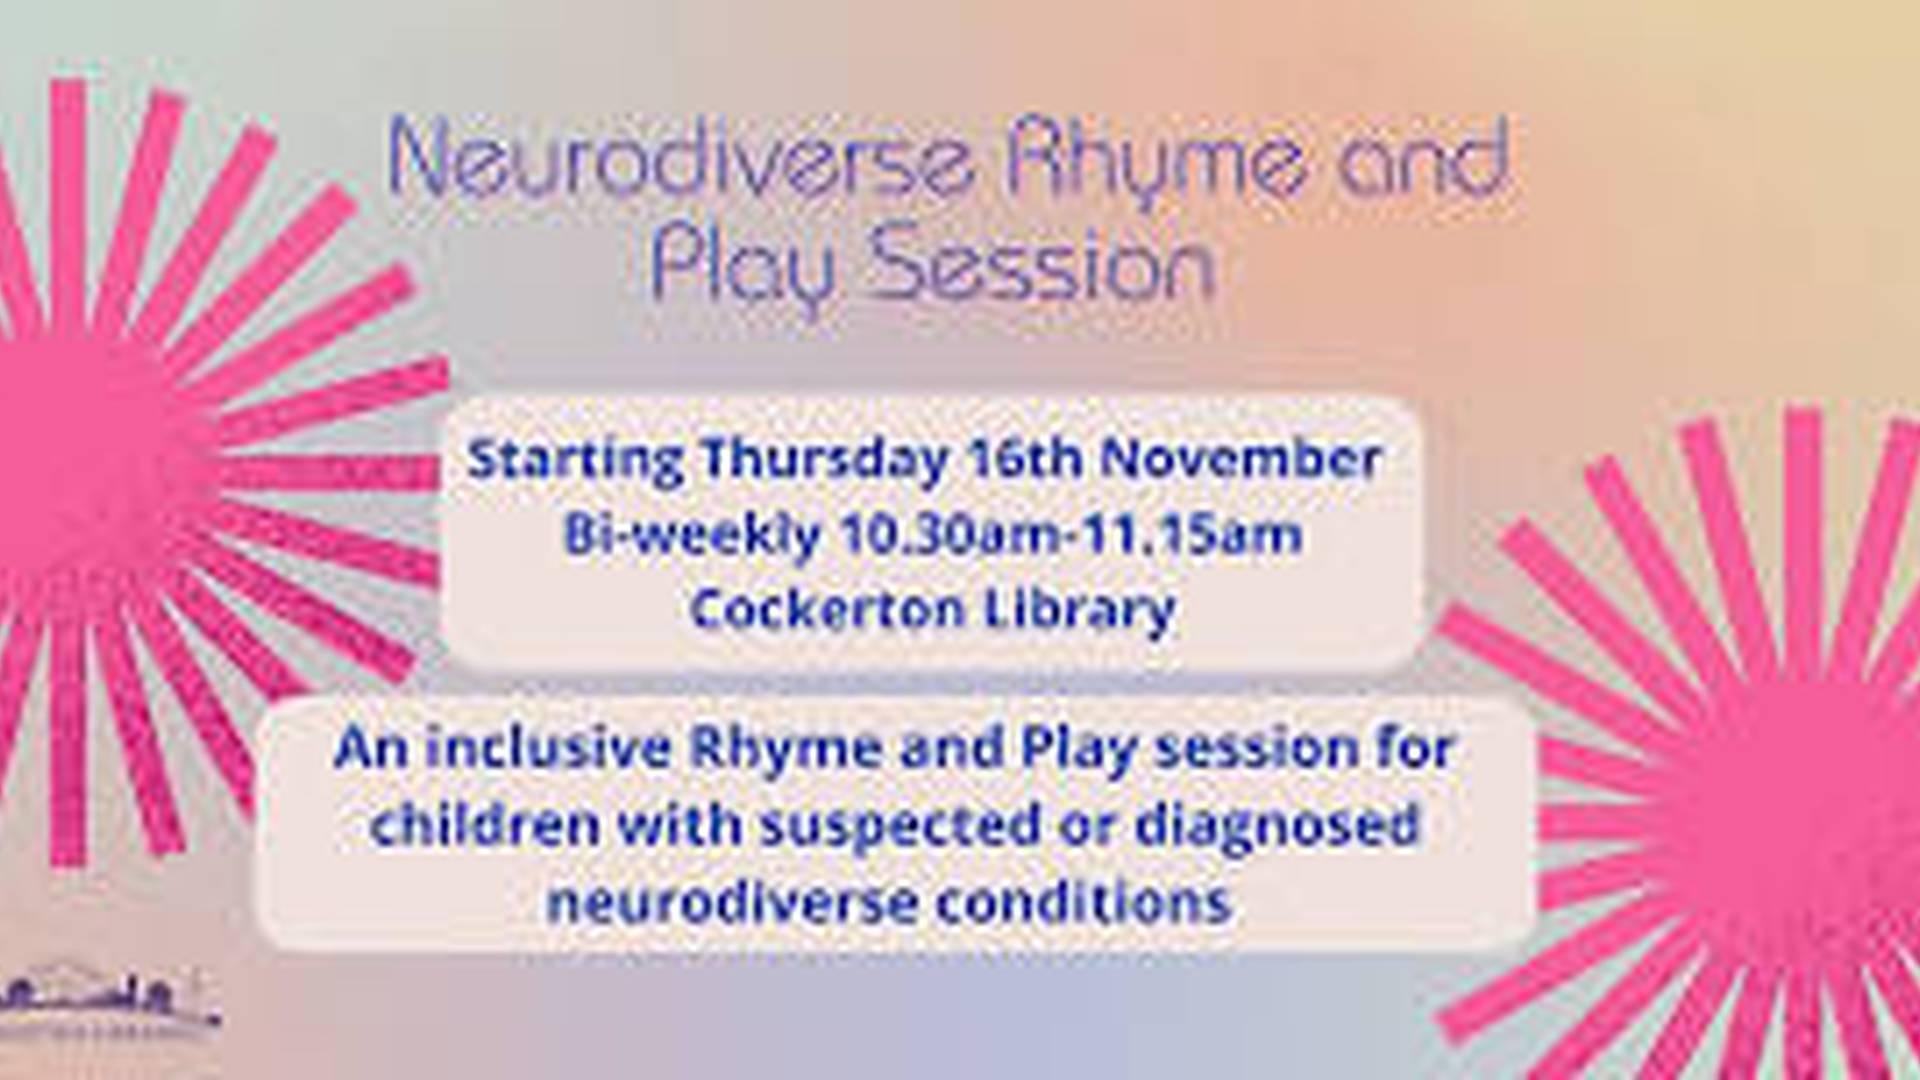 Neurodiverse Rhyme and Play Session photo